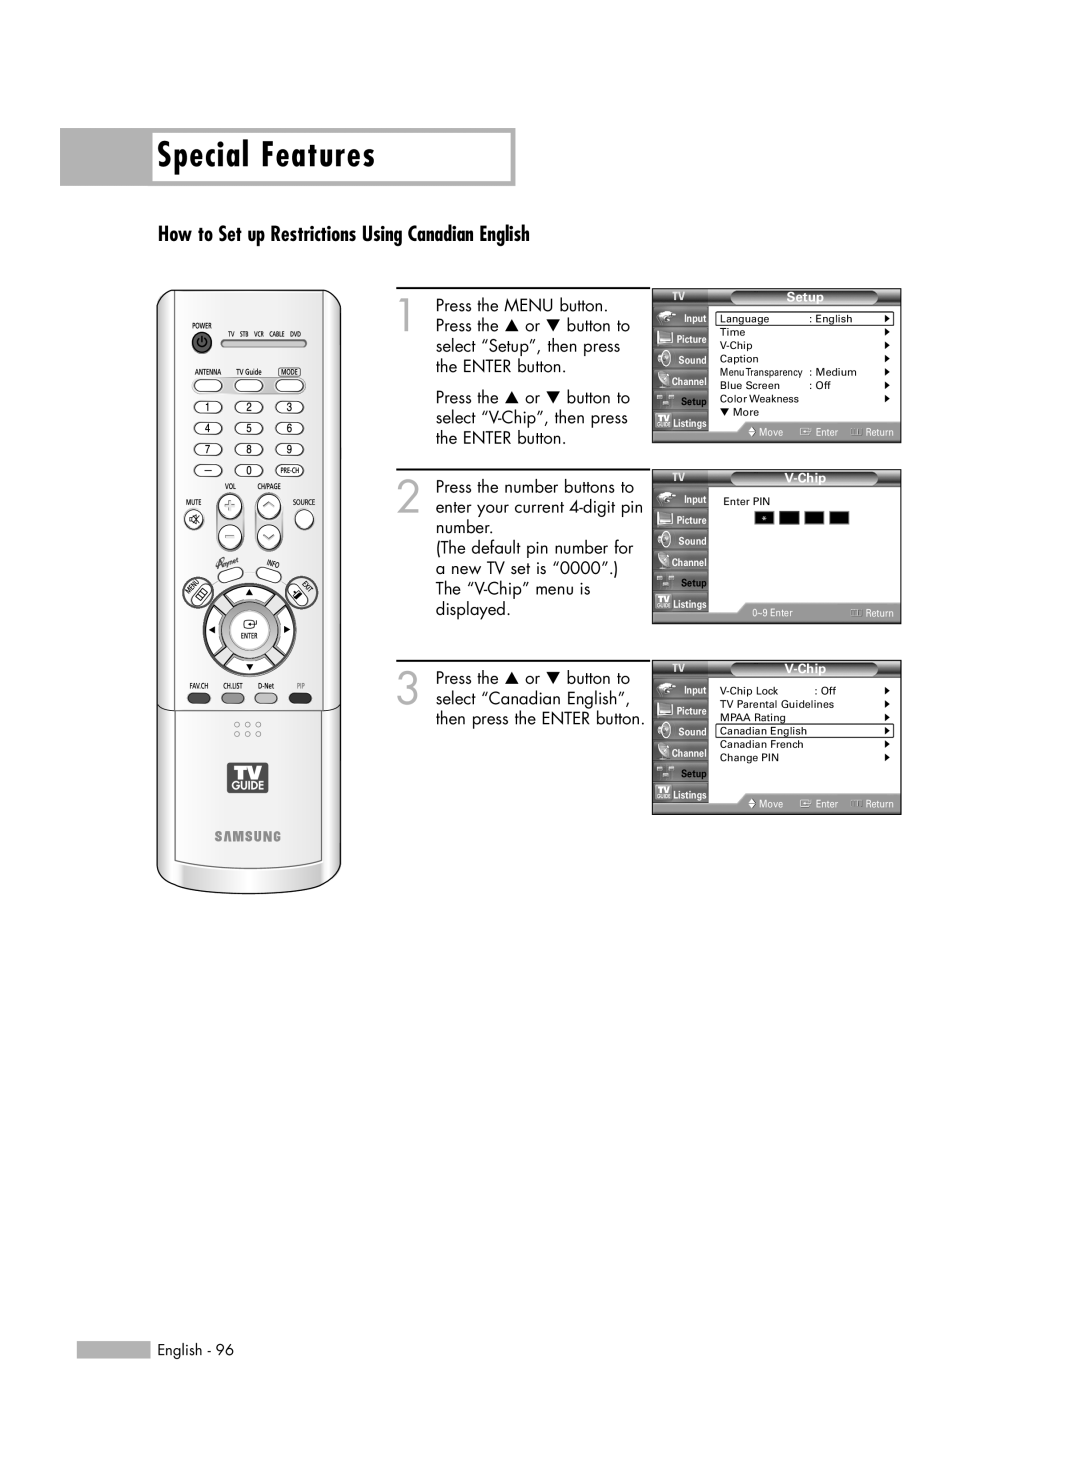 Samsung HL-R5688W manual How to Set up Restrictions Using Canadian English, Special Features 